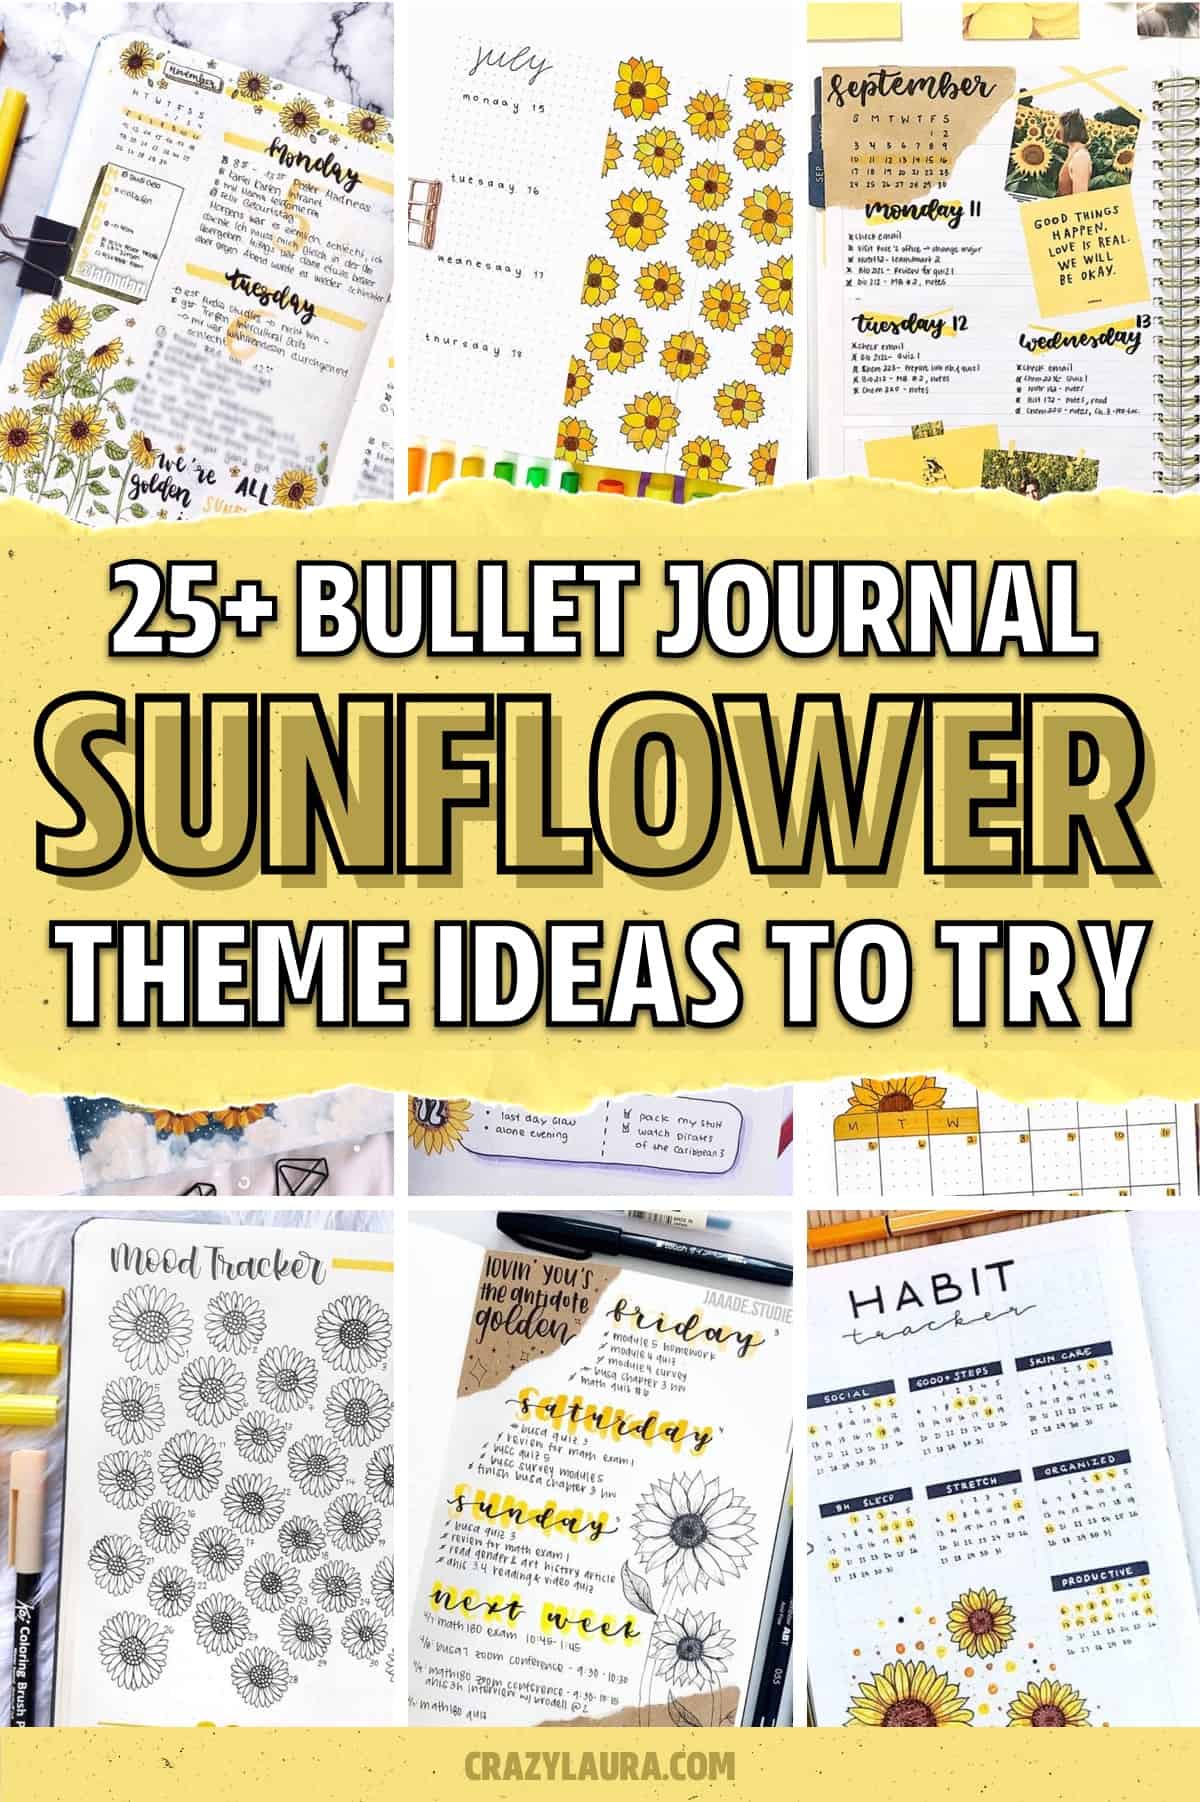 journal theme inspiration with flowers